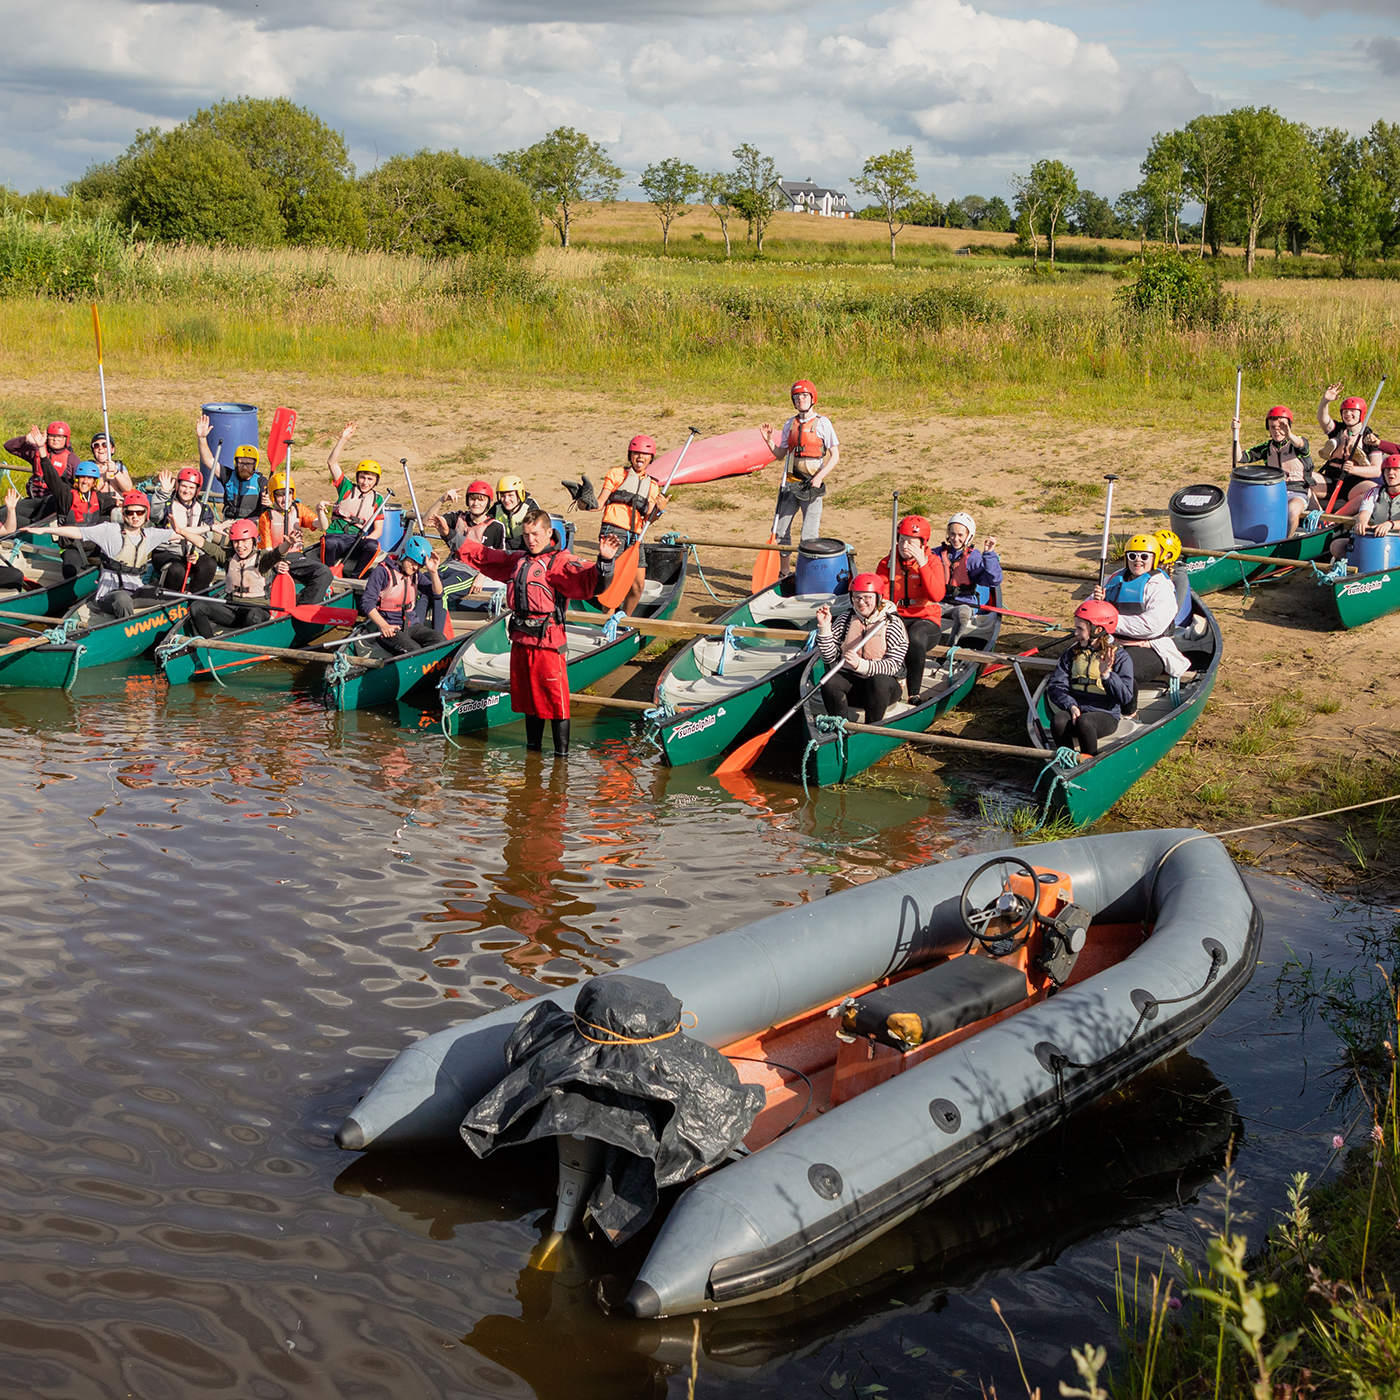 <div class="activity-column-left" data-wp-editing="1">
<p style="padding-left: 40px;"></p>
Gaisce has become synonymous with secondary schools over the last 20 years. Many schools have students working towards Bronze, Silver and Gold. Here, at Shannon River Adventure, we can help with your physical Recreation and Adventure journey requirements, be it a two-day/one night expedition for the Bronze award, or a three-day/two night adventure for the Silver. For the Gold Award, please <a href="https://www.shannonriveradventure.com/contact">enquire</a> within.

<img class="wp-image-3408 size-full" src="https://www.shannonriveradventure.com/wp-content/uploads/2021/03/Safari_IMG_5042-Pano-scaled.jpg" alt="" width="2560" height="890" /> Onsite camping for up to 75
<h5 style="text-align: center;">Your Gaisce Journey at Shannon River Adventure (Bronze)</h5>
<img class="wp-image-3409 size-full" src="https://www.shannonriveradventure.com/wp-content/uploads/2021/03/Island_tent-scaled.jpg" alt="" width="2560" height="1707" /> Island Camping for up to 50
<p style="padding-left: 40px;"><em>"Tommy, Lara and crew were so welcoming and professional. There was a really positive vibe around the centre and on the walks. The walks and trip on the Shannon provided beautiful scenery and the natural beauty of the island was breath taking. </em></p>
<p style="padding-left: 40px;"><em>Camping on Rabbit Island is a must do experience for anyone and definite highlight of our stay. The walks were well organised and it was obvious great thought, care and research was put into picking out the most scenic routes. We would highly recommend the centre to any school and can’t wait to go back!”
</em>- Caroline & Trish.</p>
<img class="alignnone wp-image-2671 size-large" src="https://www.shannonriveradventure.com/wp-content/uploads/2021/01/Island_journey-1024x682.png" alt="" width="1024" height="682" />

Begin with on-site training to include: map reading, Leave No Trace

There will also be training in the various components of camp craft to include: erecting tents; lighting camp fires; lighting of and cooking on fireboxes; “Leave No Trace” principles.

<strong>The journey element of the program will encompass walking country roads & trails and a canoe-raft journey to the island.
</strong>

Participants will be involved in setting up camp, cooking on fireboxes, and will have some freedom to explore the island. There will be structured night-time forest games.

<img class="alignnone wp-image-2679 size-thumbnail" src="https://www.shannonriveradventure.com/wp-content/uploads/2021/01/Forest_games-150x150.jpg" alt="" width="150" height="150" /> <img class="alignnone wp-image-2670 size-thumbnail" src="https://www.shannonriveradventure.com/wp-content/uploads/2021/01/Fire_lighting_Inez-150x150.jpg" alt="" width="150" height="150" /> <img class="alignnone wp-image-2680 size-thumbnail" src="https://www.shannonriveradventure.com/wp-content/uploads/2021/01/Island_cooking-150x150.jpg" alt="" width="150" height="150" /> <img class="alignnone wp-image-2673 size-thumbnail" src="https://www.shannonriveradventure.com/wp-content/uploads/2021/01/fire_marshmallows--150x150.jpg" alt="" width="150" height="150" />

</div>
Finish the evening with roasting marshmallows and relaxing around camp fire until agreed wind down time

<strong>Day 2</strong>

<strong>Breakfast followed by break-up of camp</strong>

<strong>Walking package: C</strong>anoe to 2nd walking trail to complete (12.5km) and finish at centre.

<strong>Canoe package:</strong> Complete journey by paddling back to centre.

<strong>Our prices include: </strong>Afternoon snack, homecooked evening meal (served on the island), marshmallows, cooked breakfast (sausages, rashers, bread), choice of cereals, juice). Depending on type of journey and time of departure, sandwiches may also be provided on second day

<strong>Equipment we provide: c</strong>anoe and paddle, helmet, buoyancy aid, cag, wetsuit, tents, ground mats, maps etc

A full kit list for students is provided well in advance of the trip.

<strong>For any queries, or if you require any information about the ways in which we can help with the adventure section of the Gaisce Award, please do not hesitate to contact us.</strong>

<strong>Our senior instructor is also a Gaisce Pal.</strong>